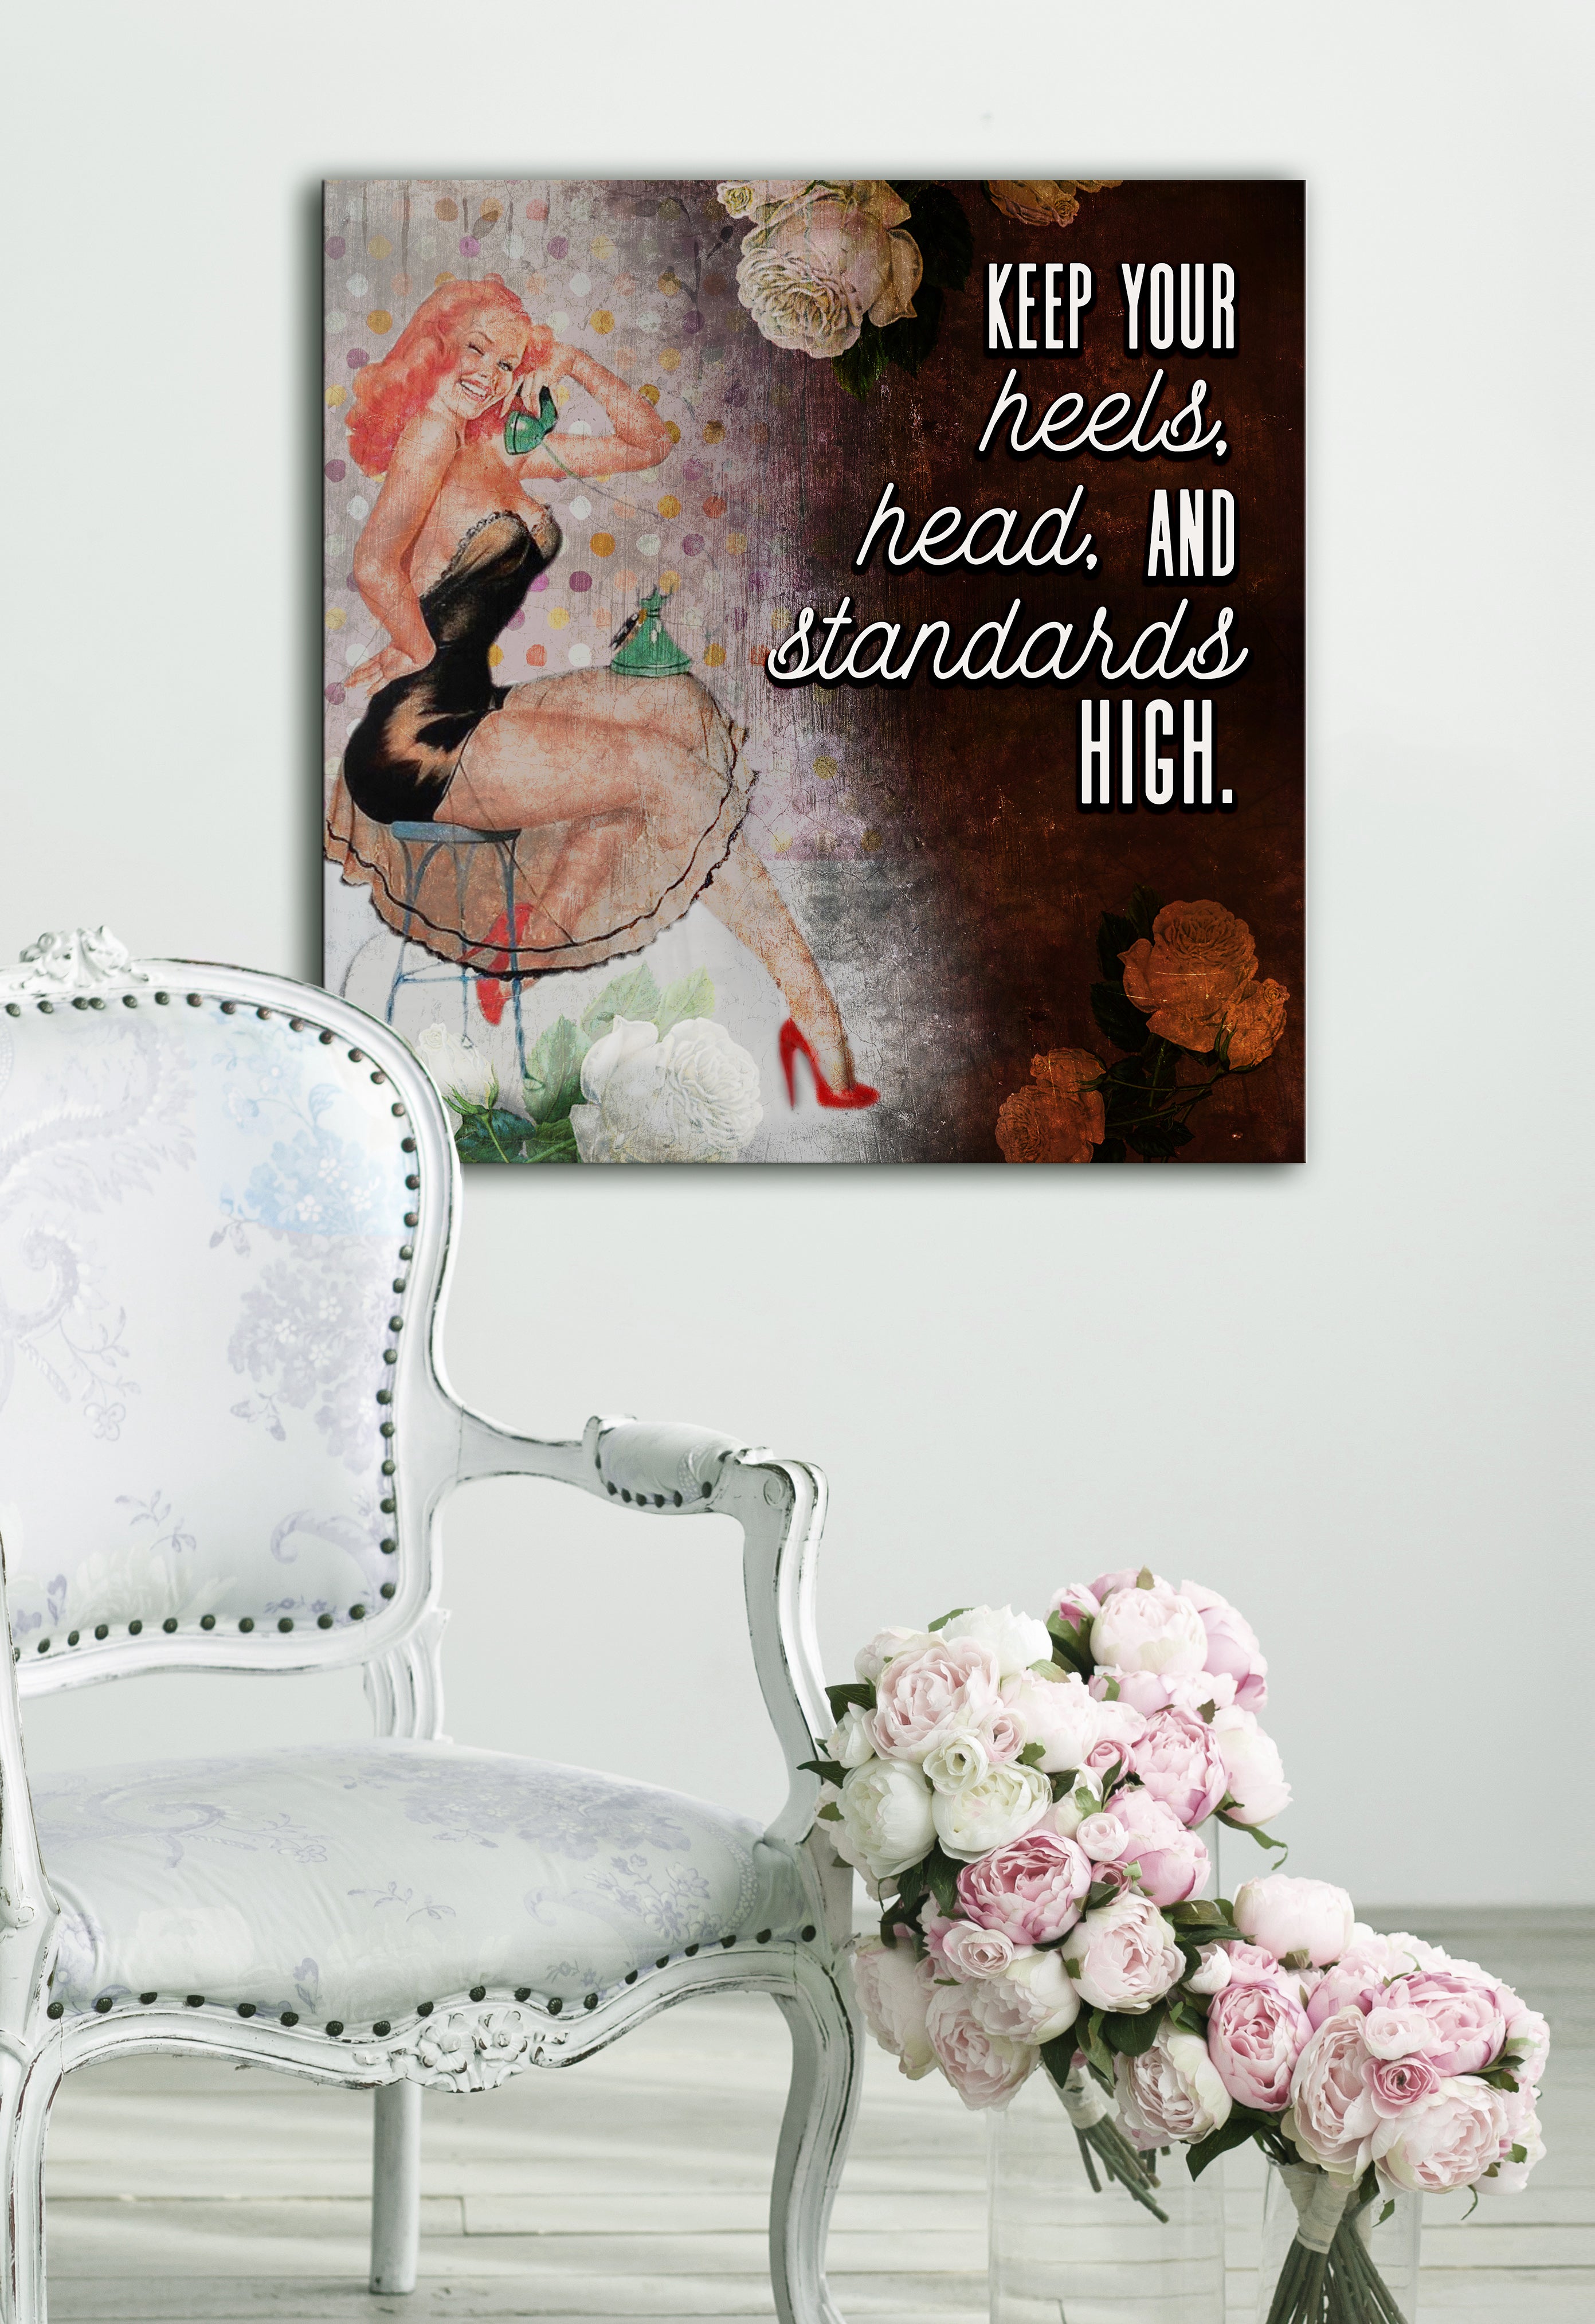 Buy wholesale Coasters, Keep Your Heels Head &Standards High. -Coco Chanel